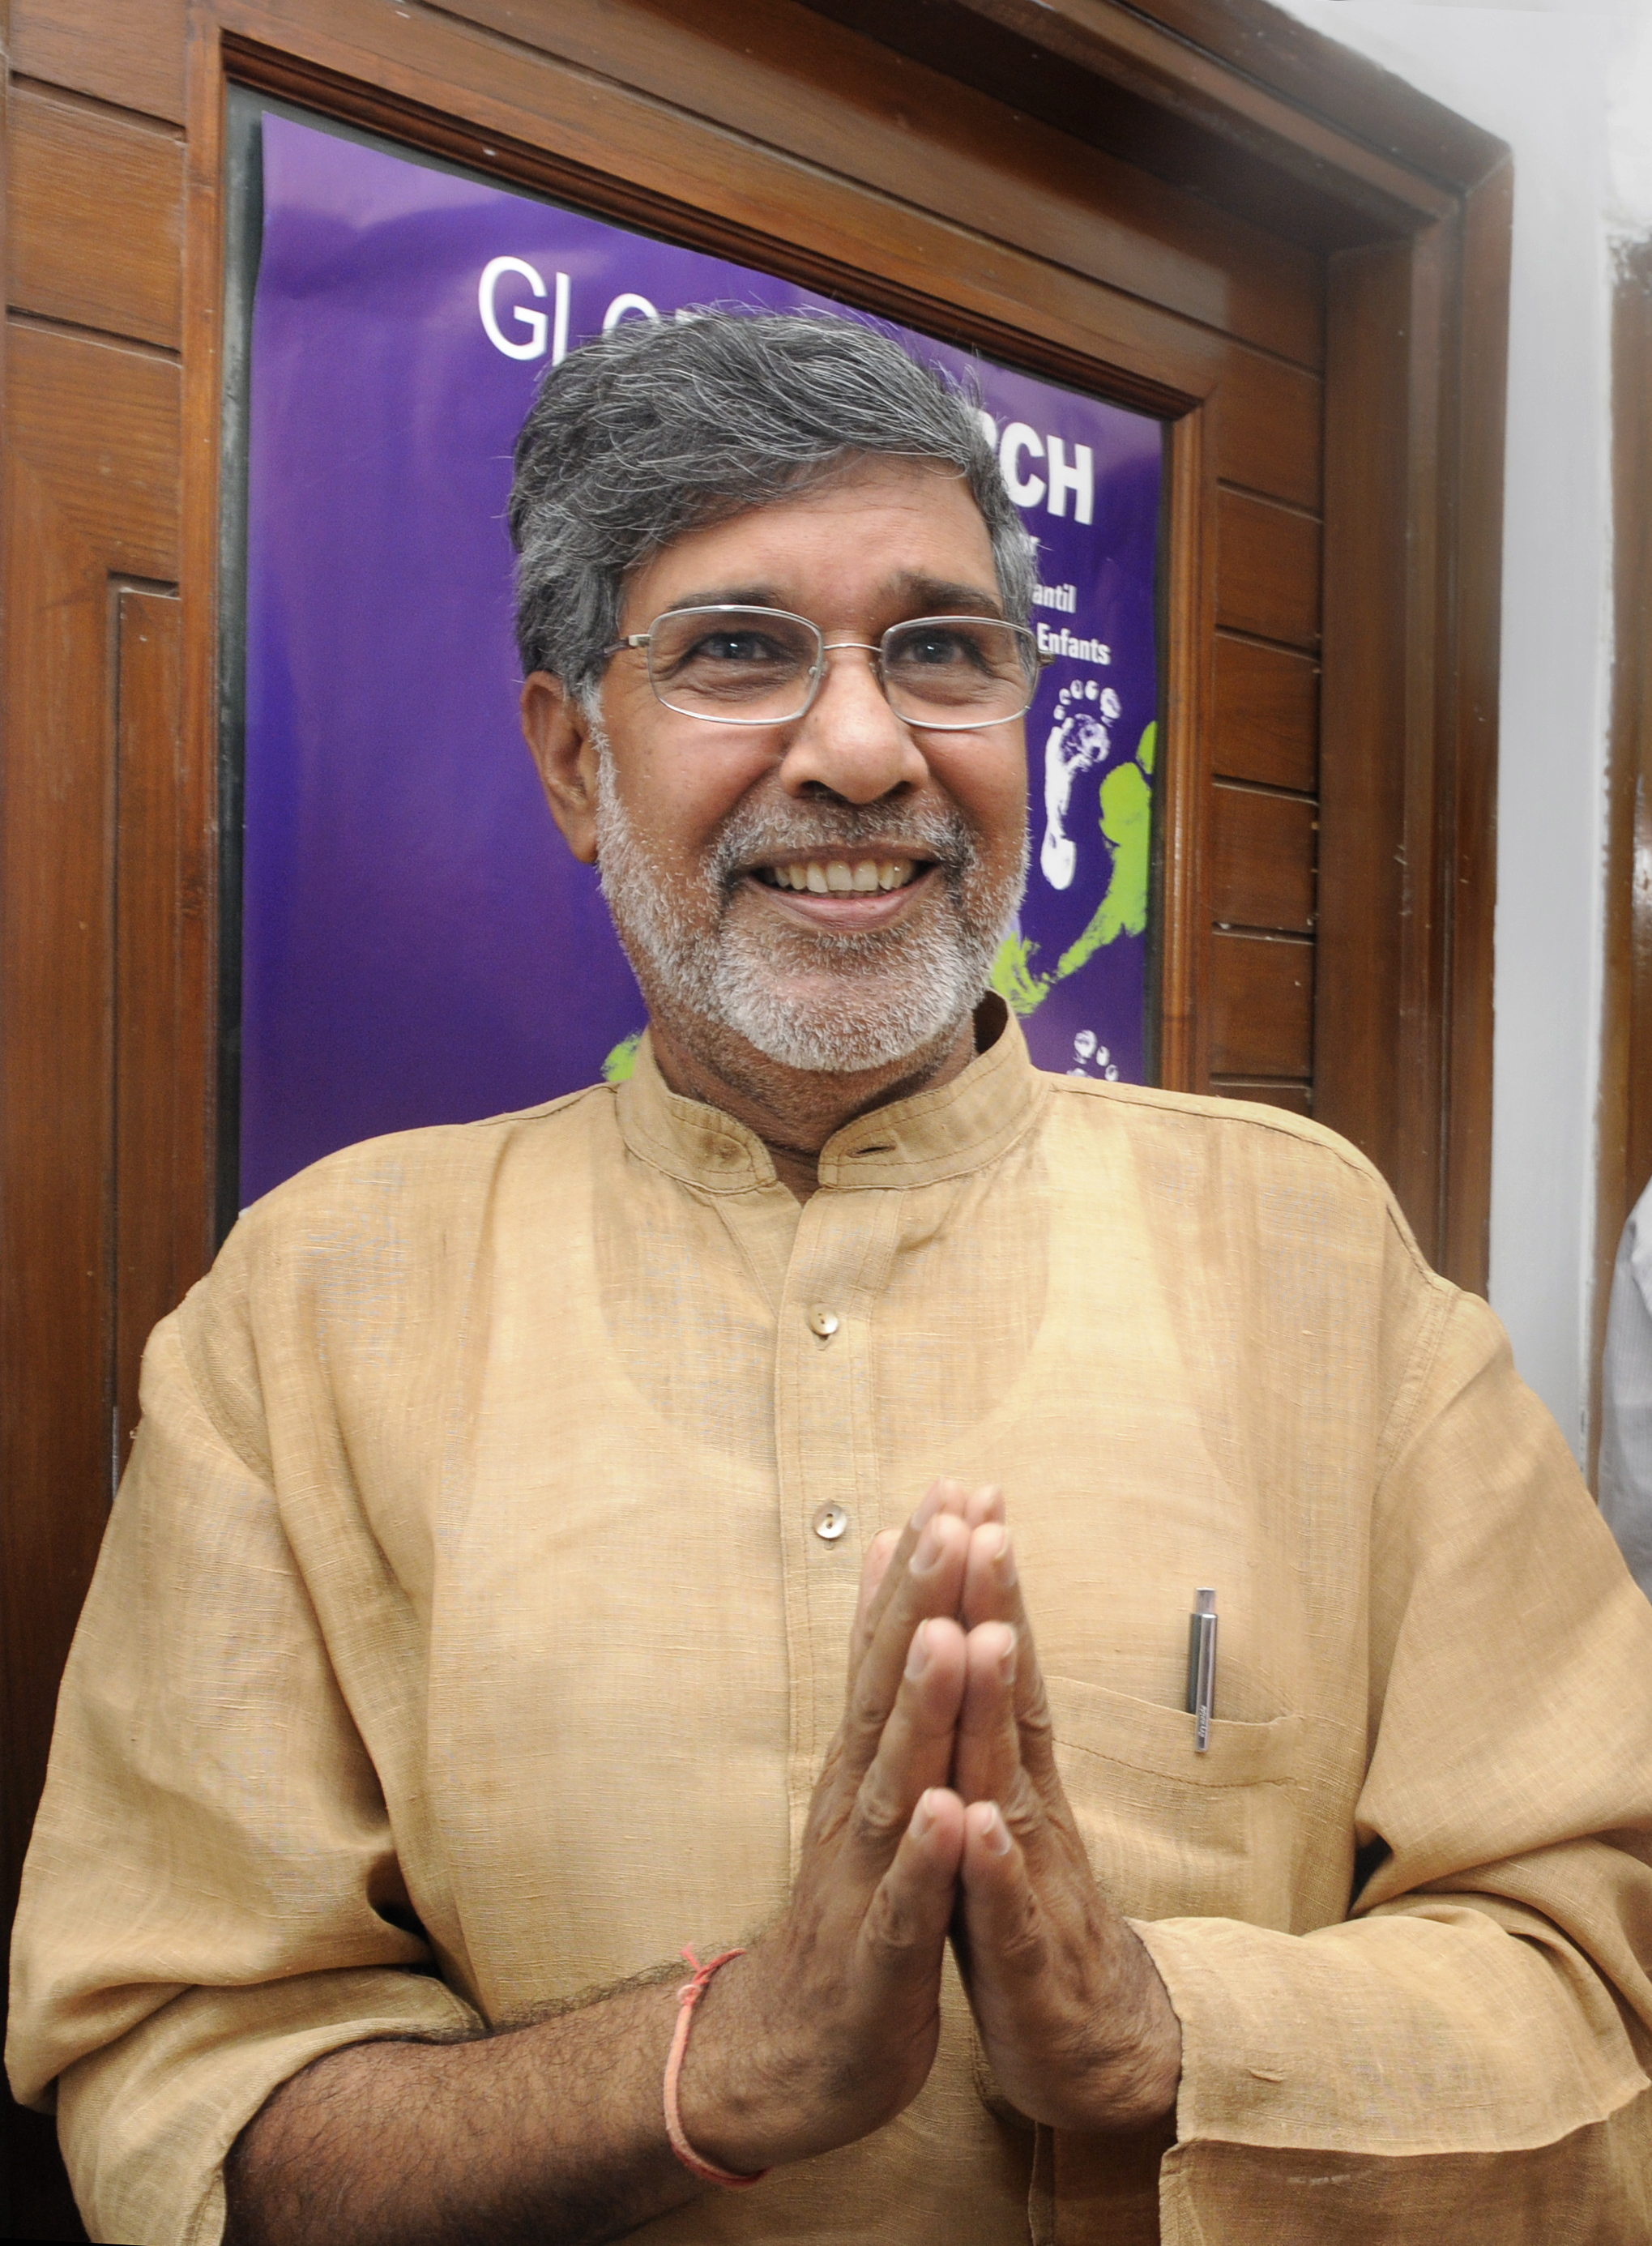 Indian childrens right activist and 2014 Nobel peace prize laureate Kailash Satyarthi greets media persons and well-wishers at his residence after the announcement of prize on October 10, 2014 in New Delhi, India. (Hindustan Times&mdash;Hindustan Times via Getty Images)